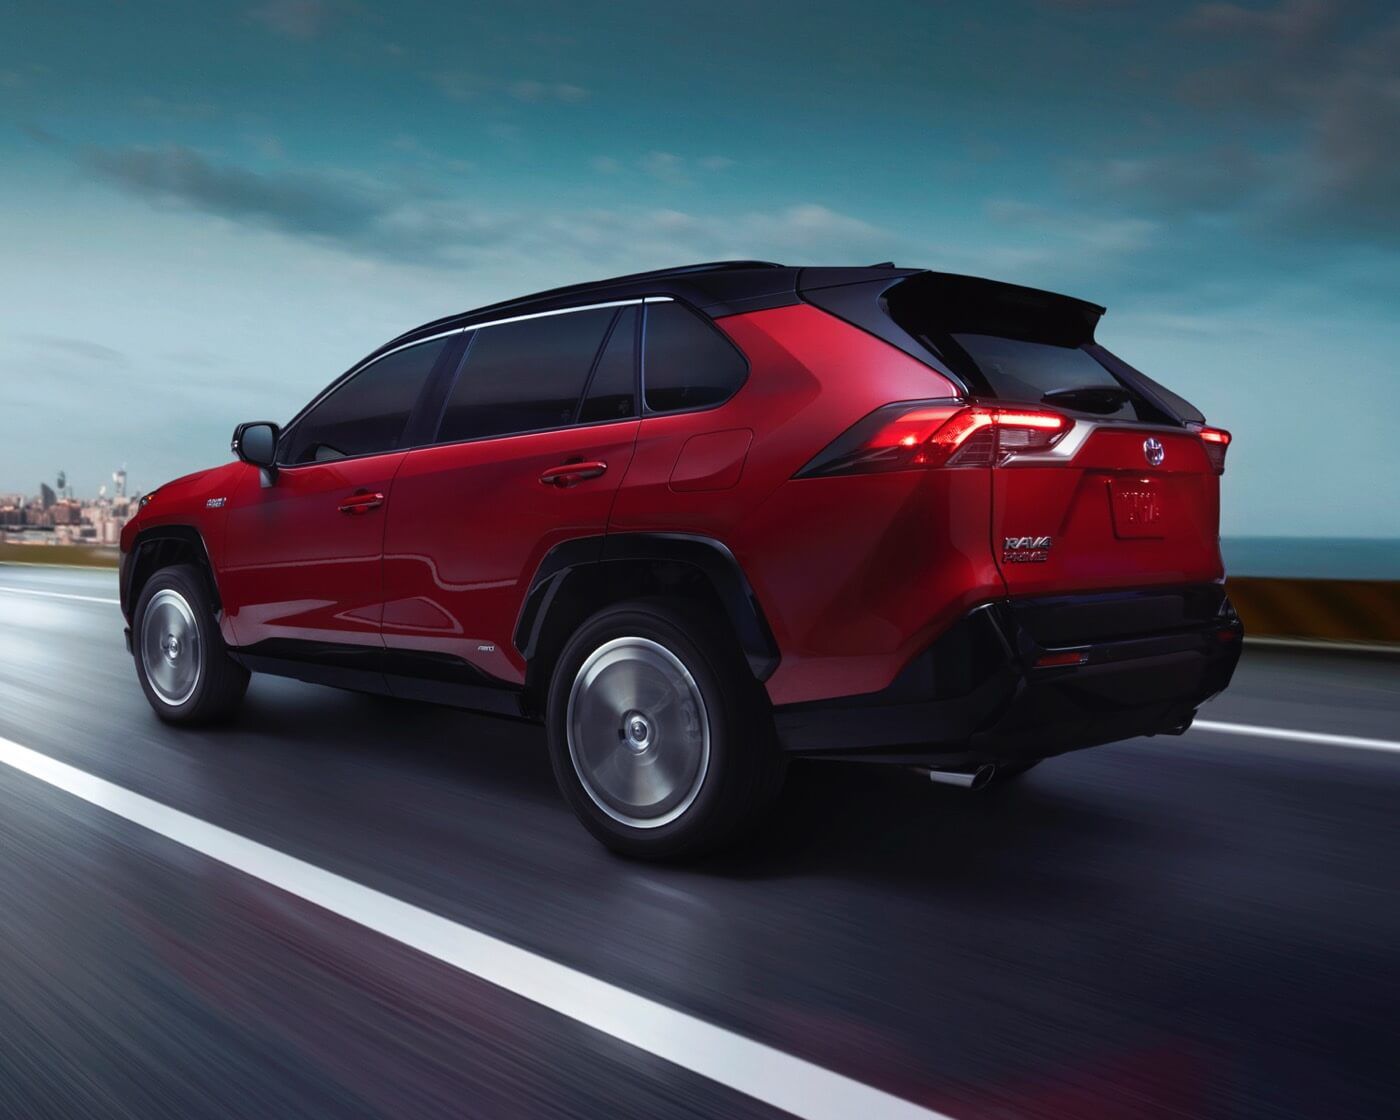 Rear 3/4 side view of a red 2022 Toyota RAV4 Prime SUV driving on a road